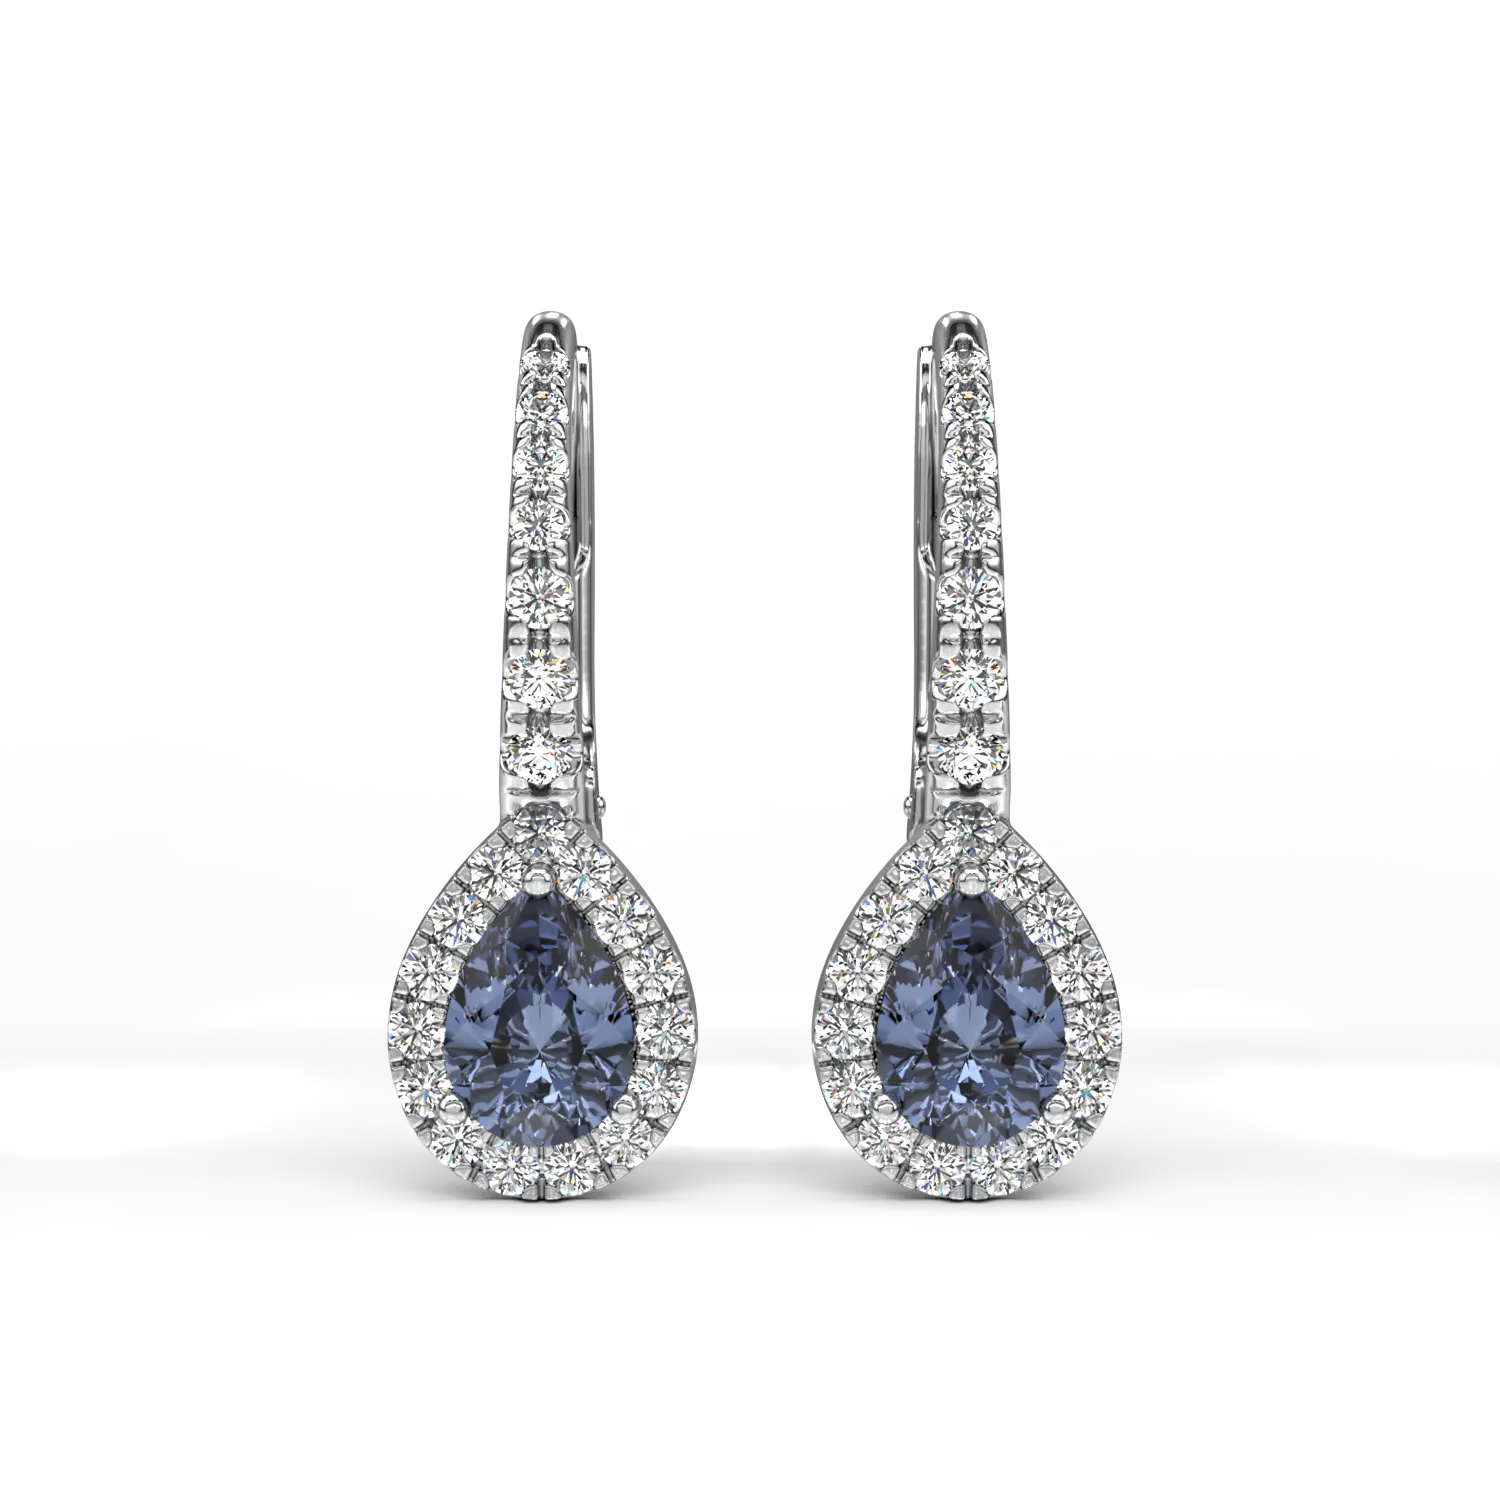 18K white gold earrings with 0.91ct sapphires and 0.42ct diamonds